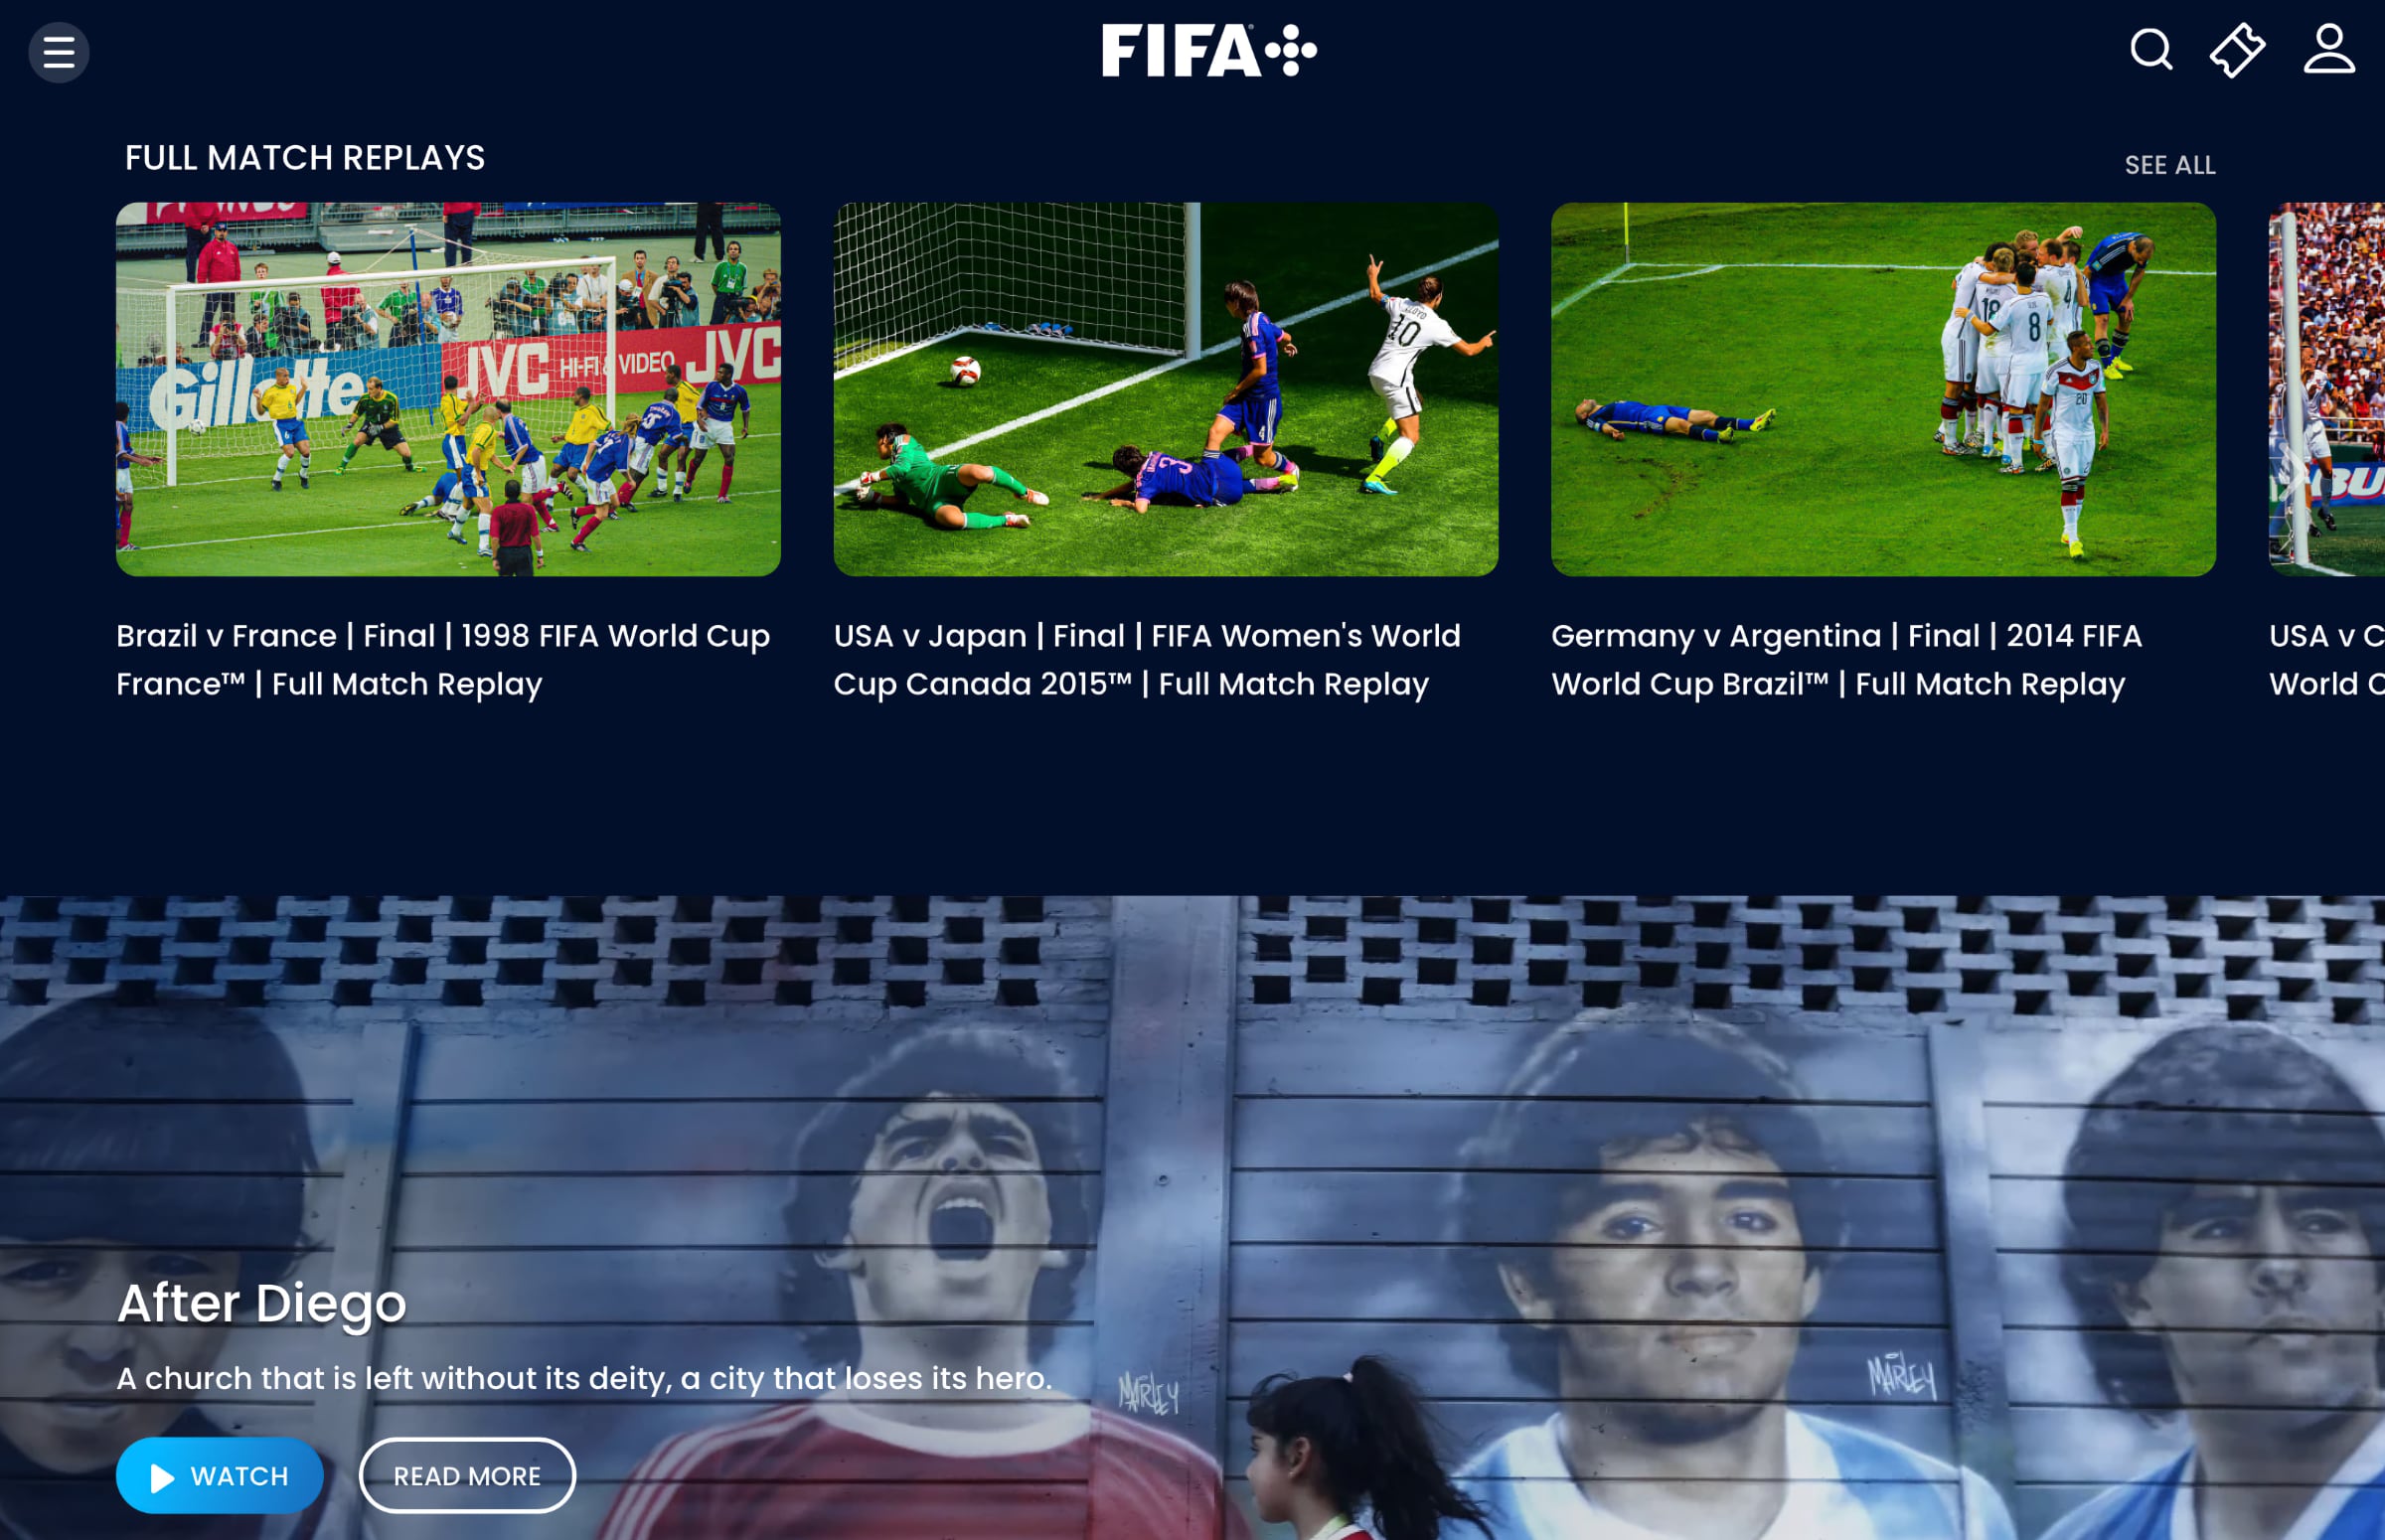 FIFA launches free FIFA+ streaming service